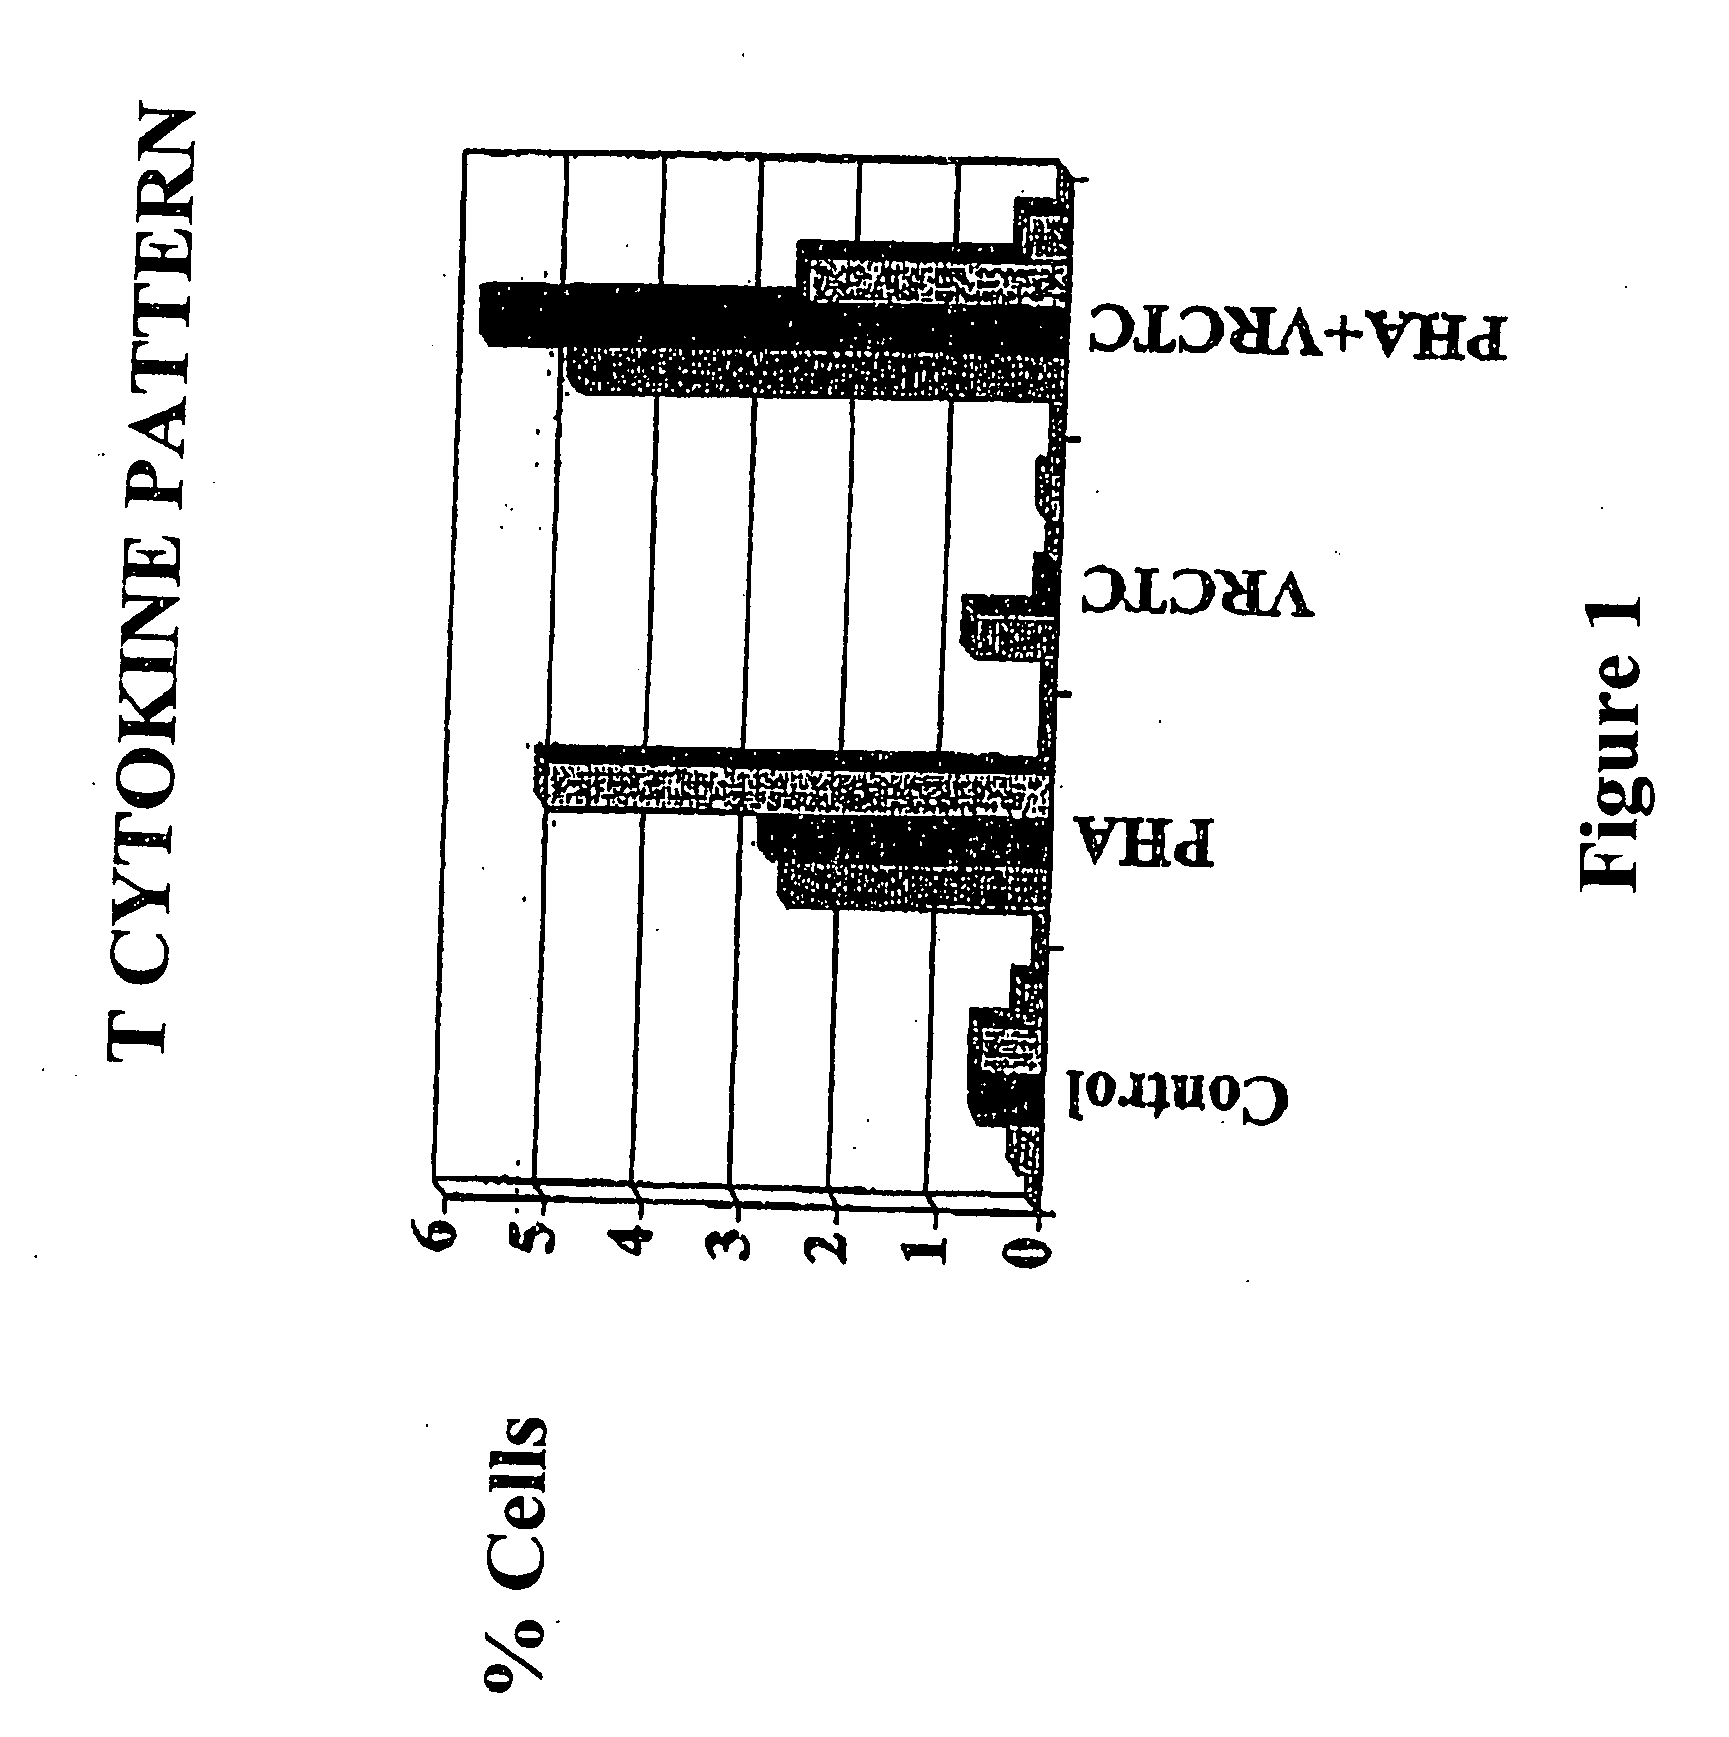 Use of a phospholipase A2 for the preparation of pharmaceutical and/or cosmetic compositions for the local and/or systematic treatment and/or prevention of diseases and/or processes caused by intra- and extracellular pathogens expressing membrane phospholipids